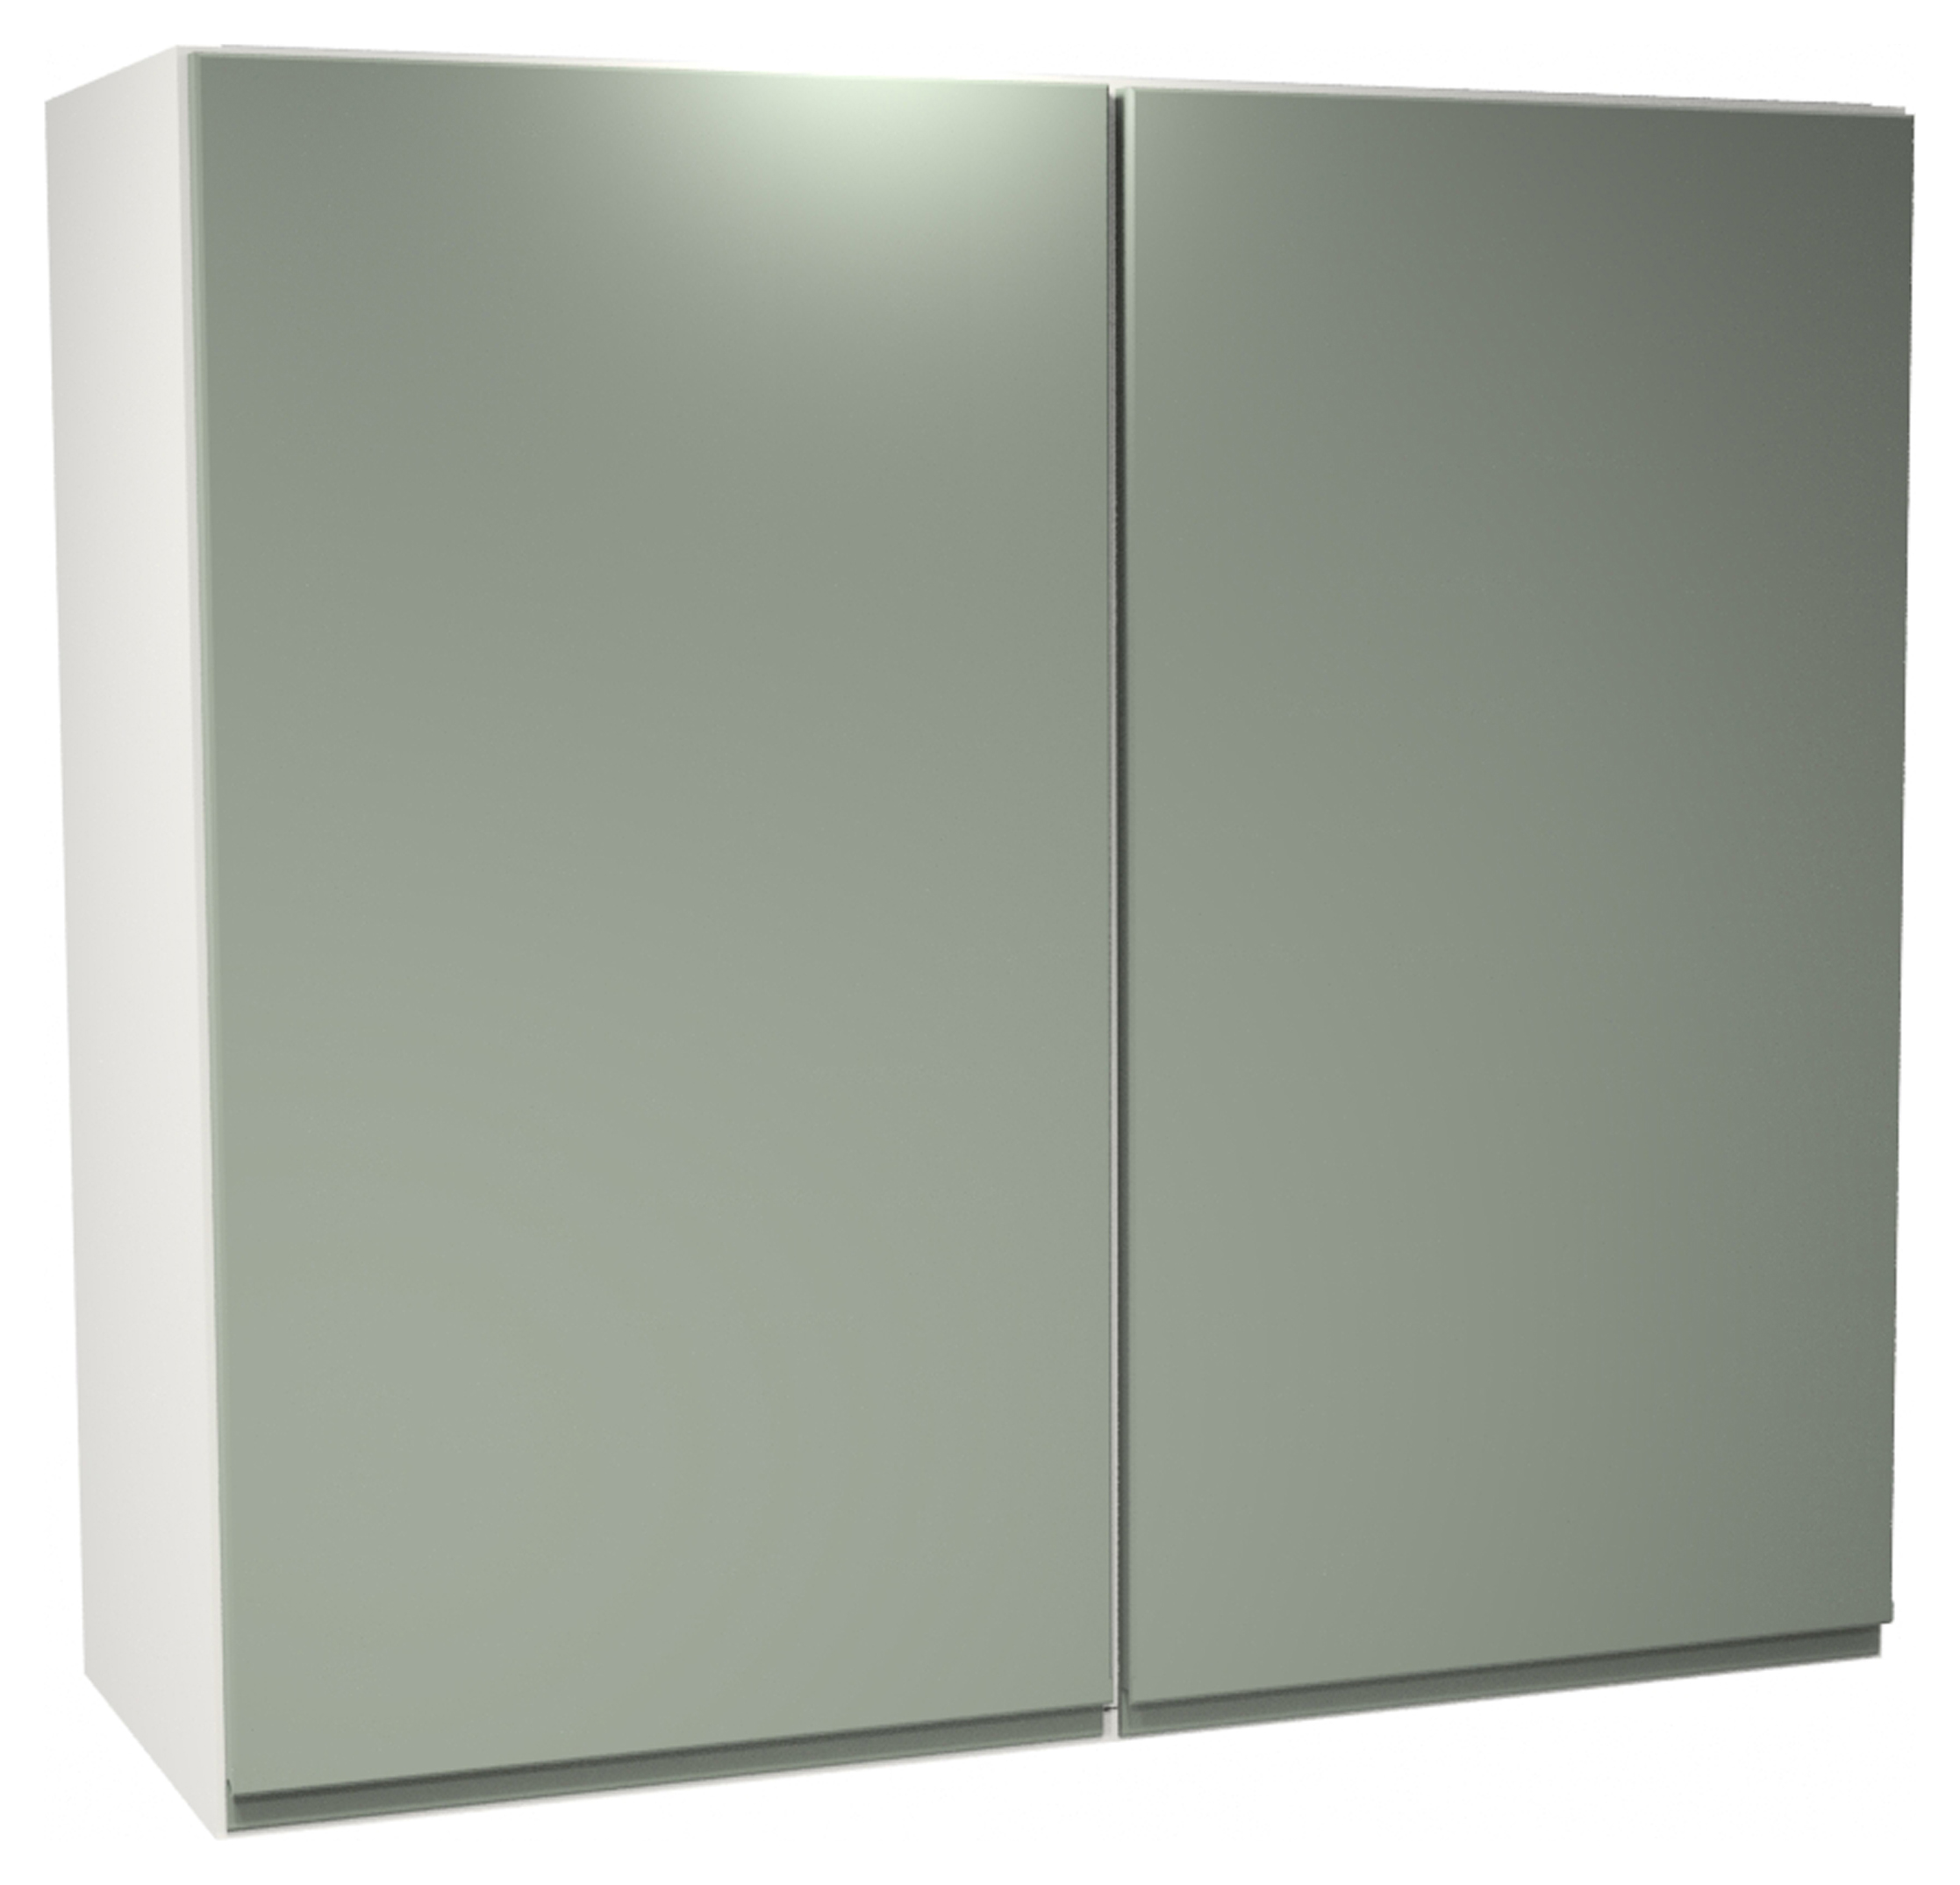 Image of Wickes Madison Reed Green Wall Unit - 800mm